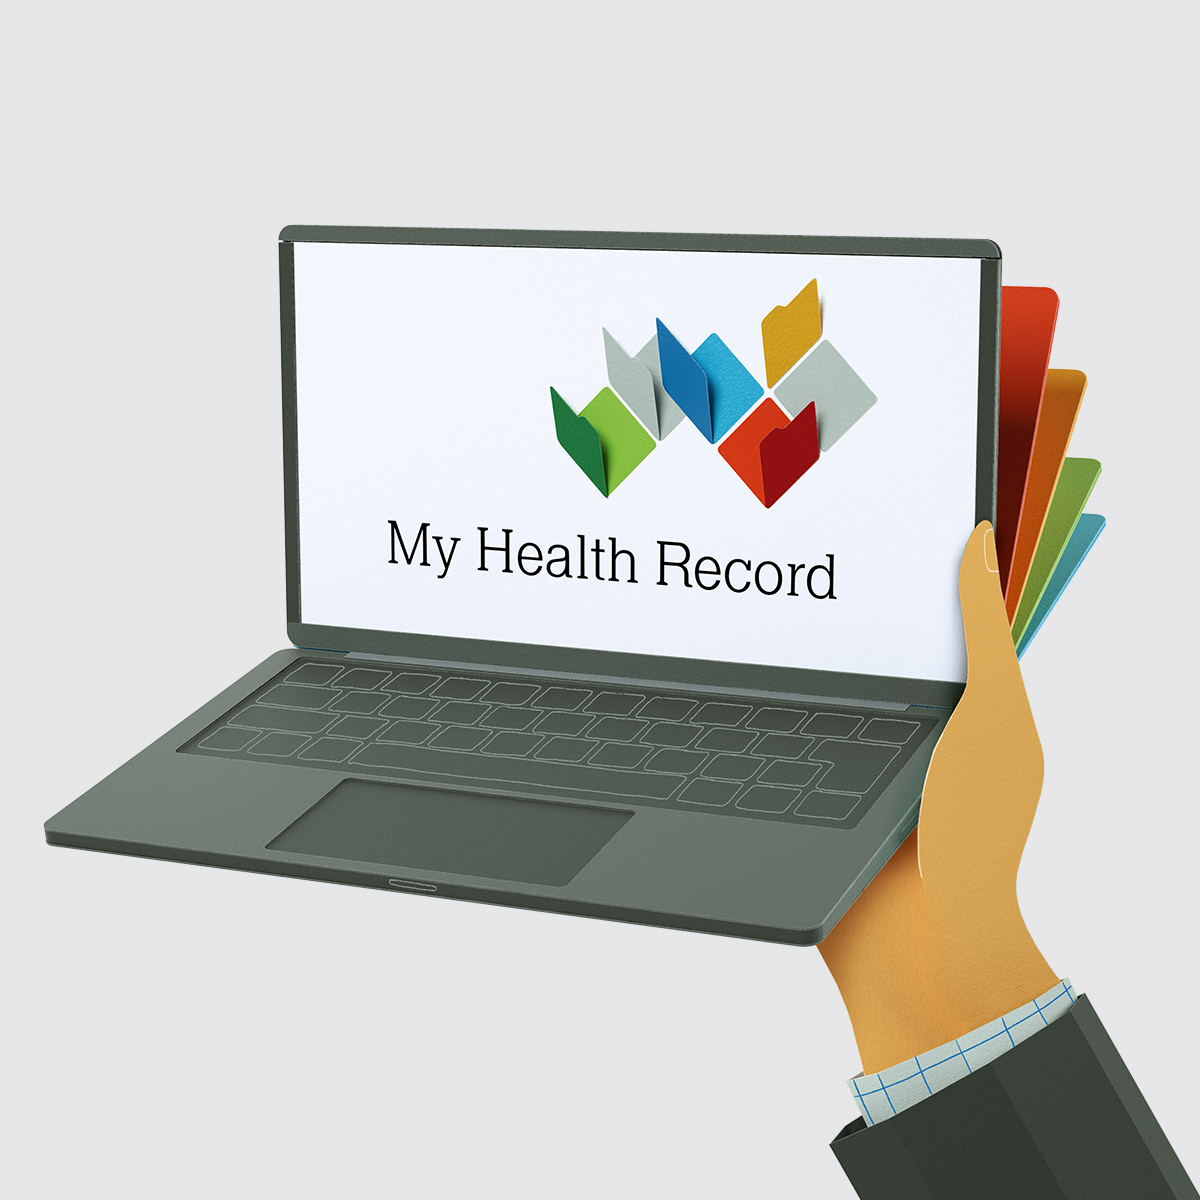 Increased use of My Health Record by healthcare providers